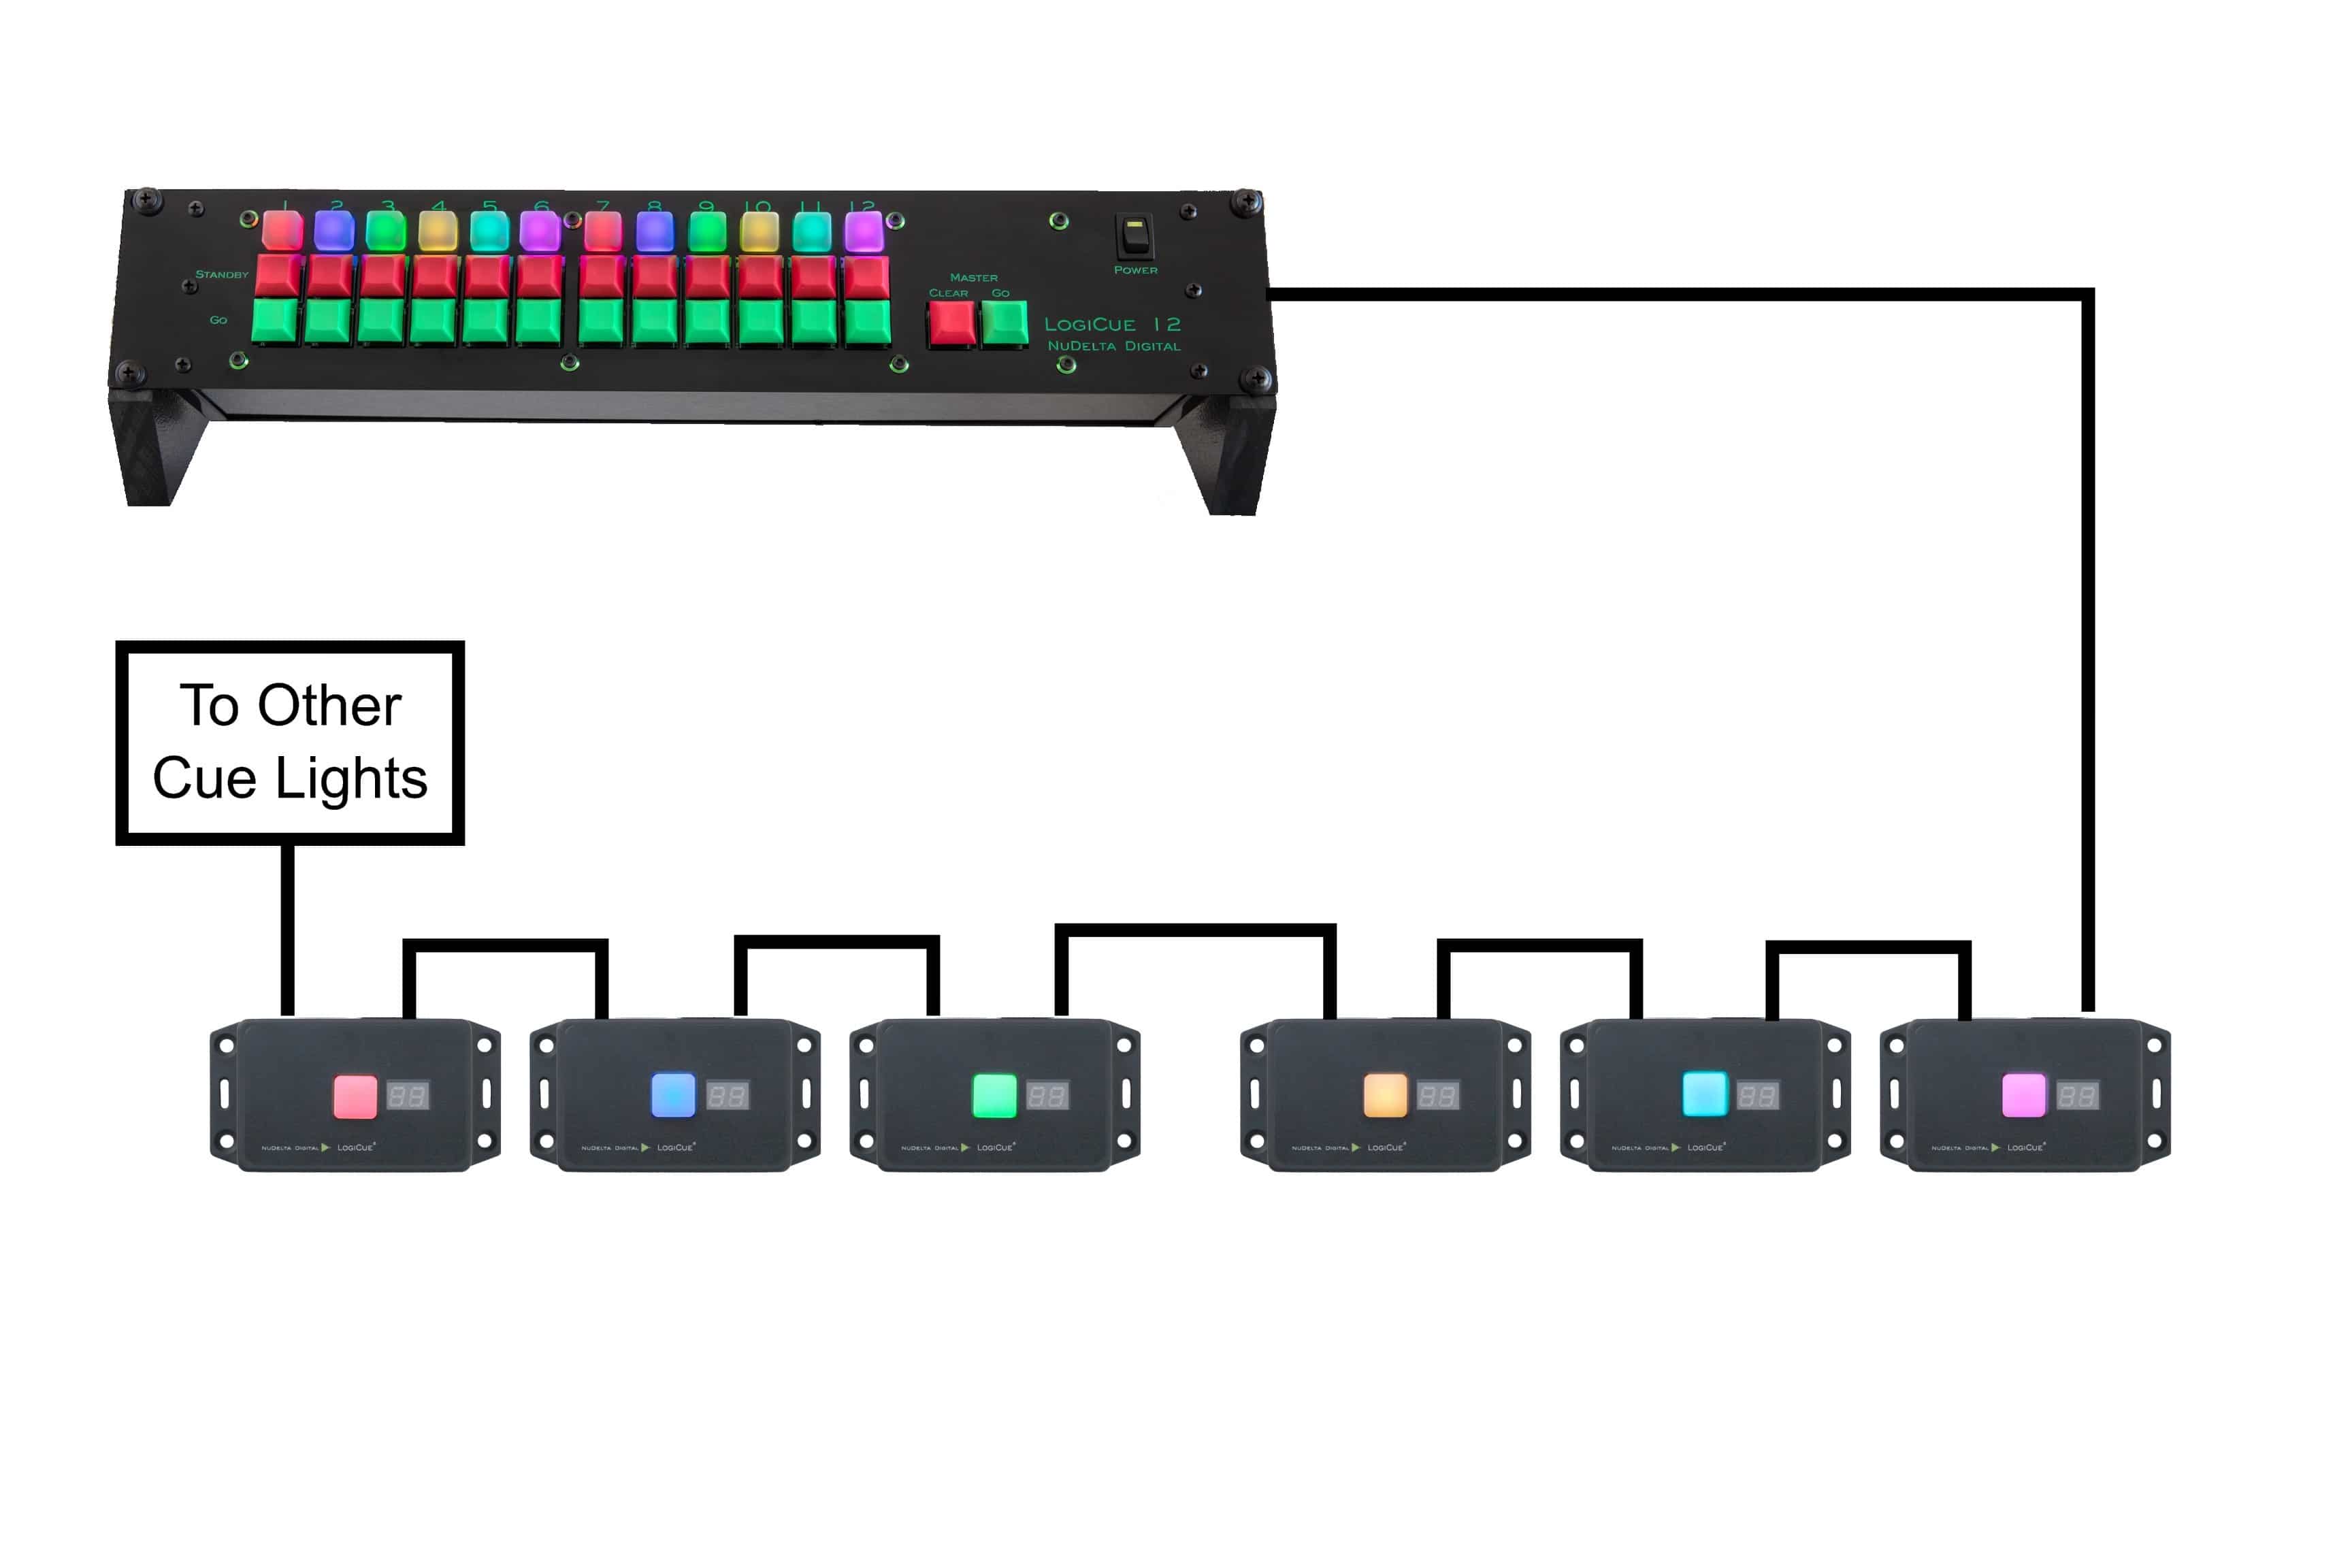 The LogiCue LC12 Digital Cue Light Controller, wiring diagram, part of the LogiCue System of cue lights.